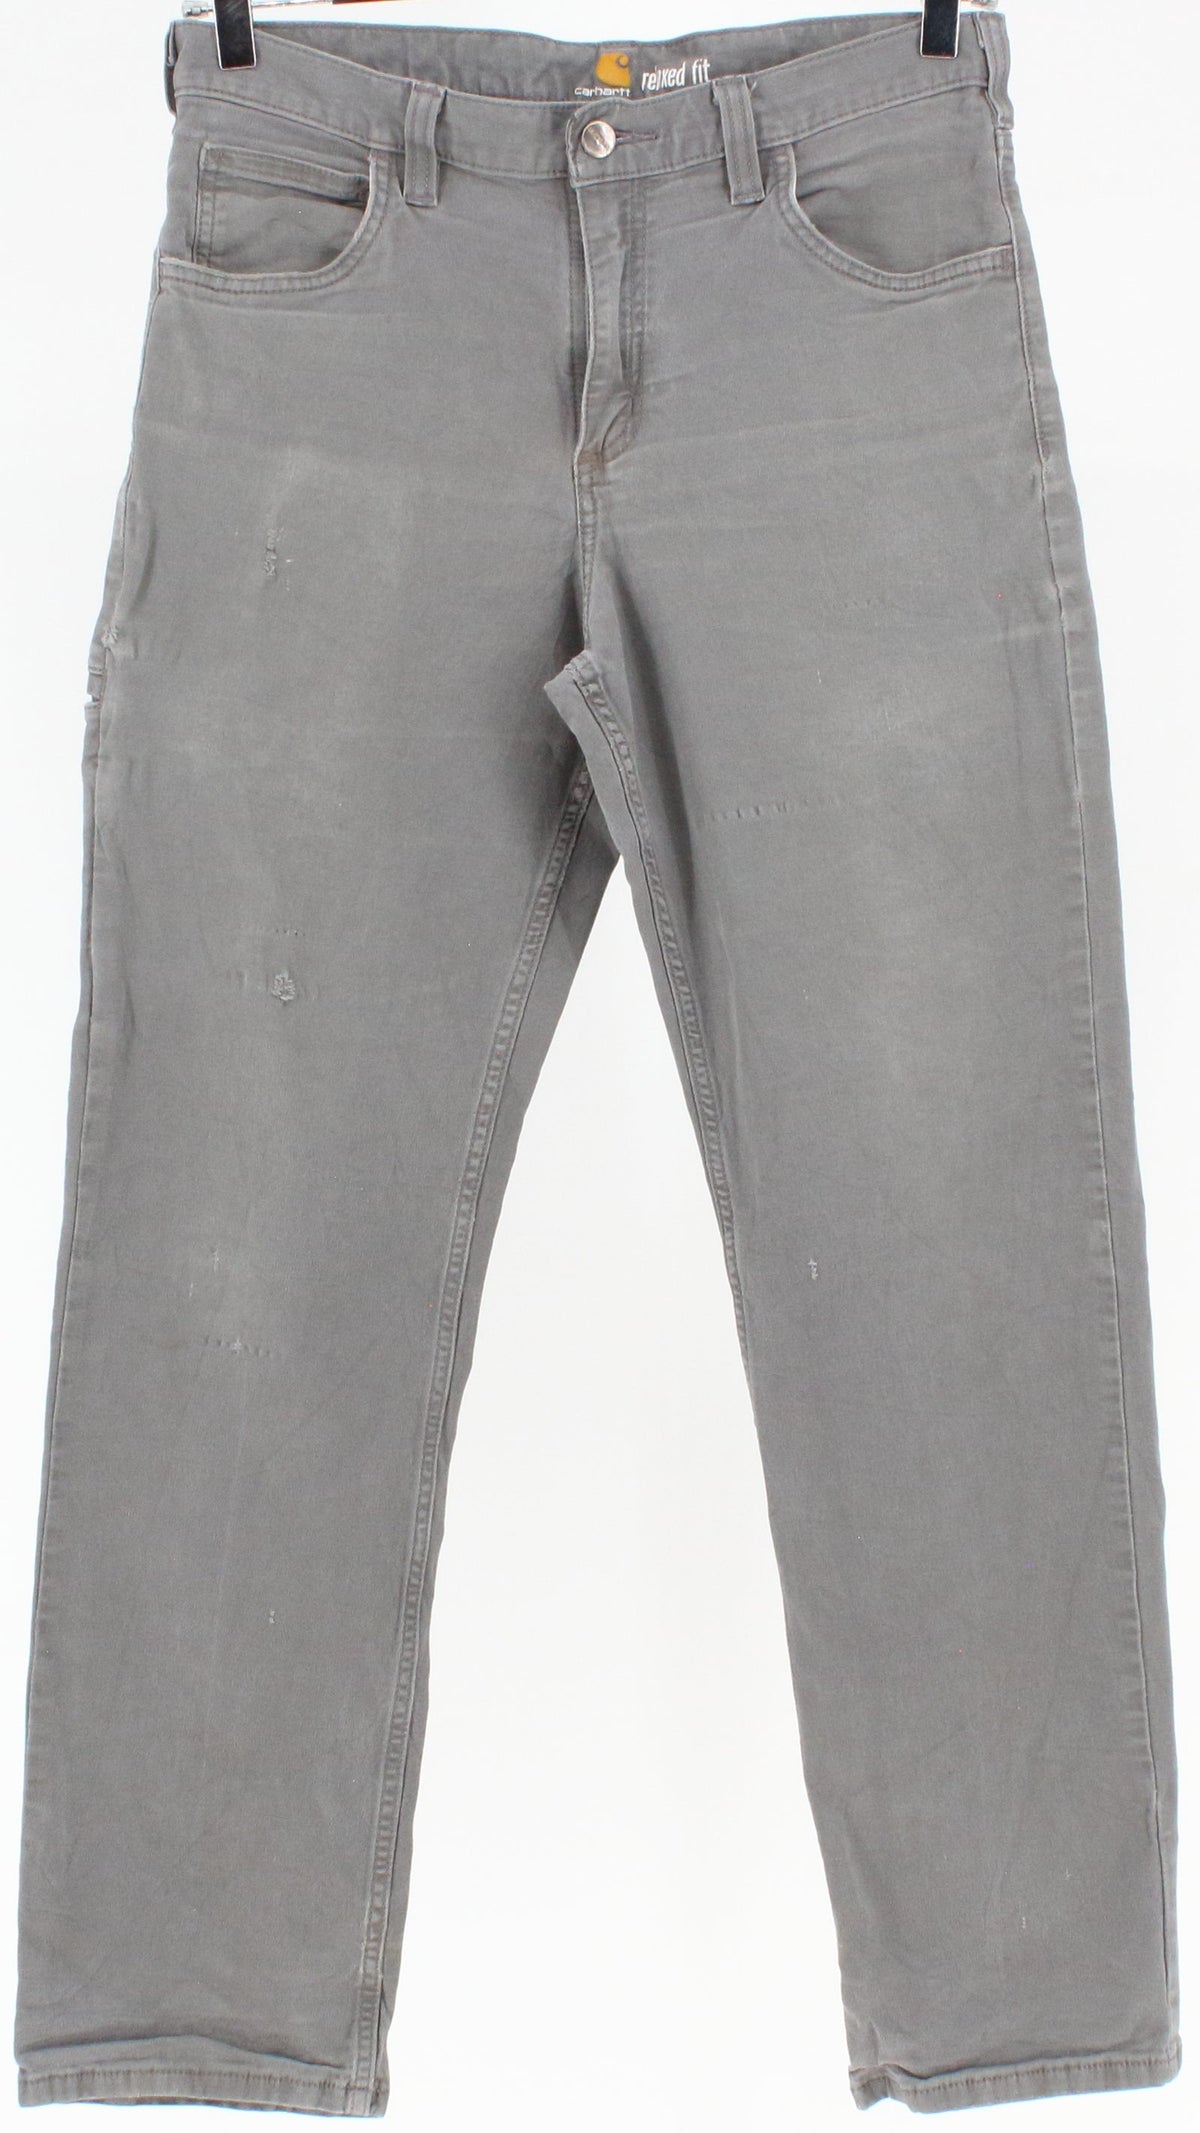 Carhartt Relaxed Fit Grey Stretch Pants